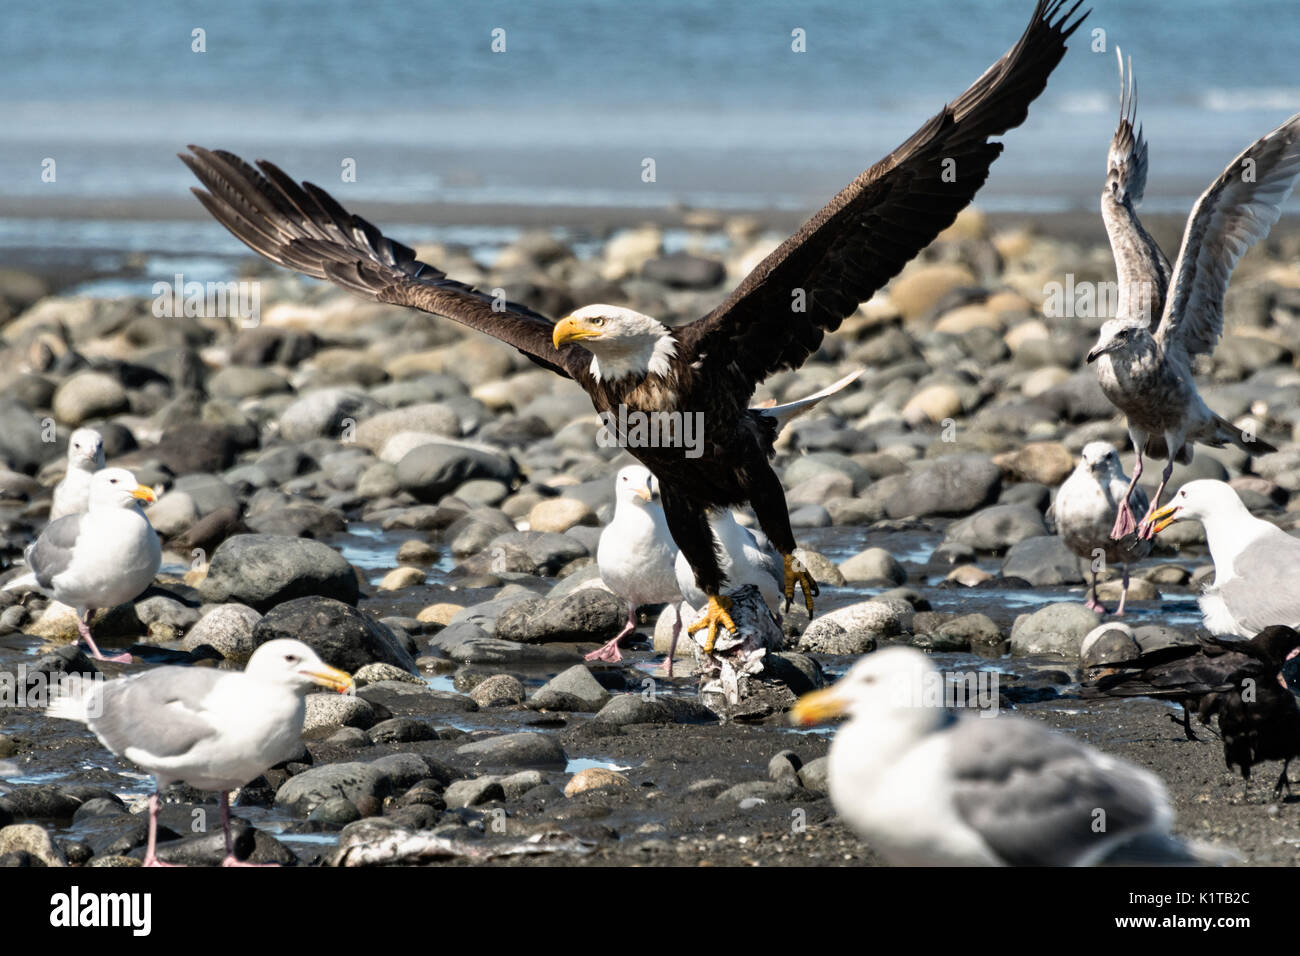 An adult bald eagle takes off after feasting on fish scraps on the beach at Anchor Point, Alaska. Stock Photo